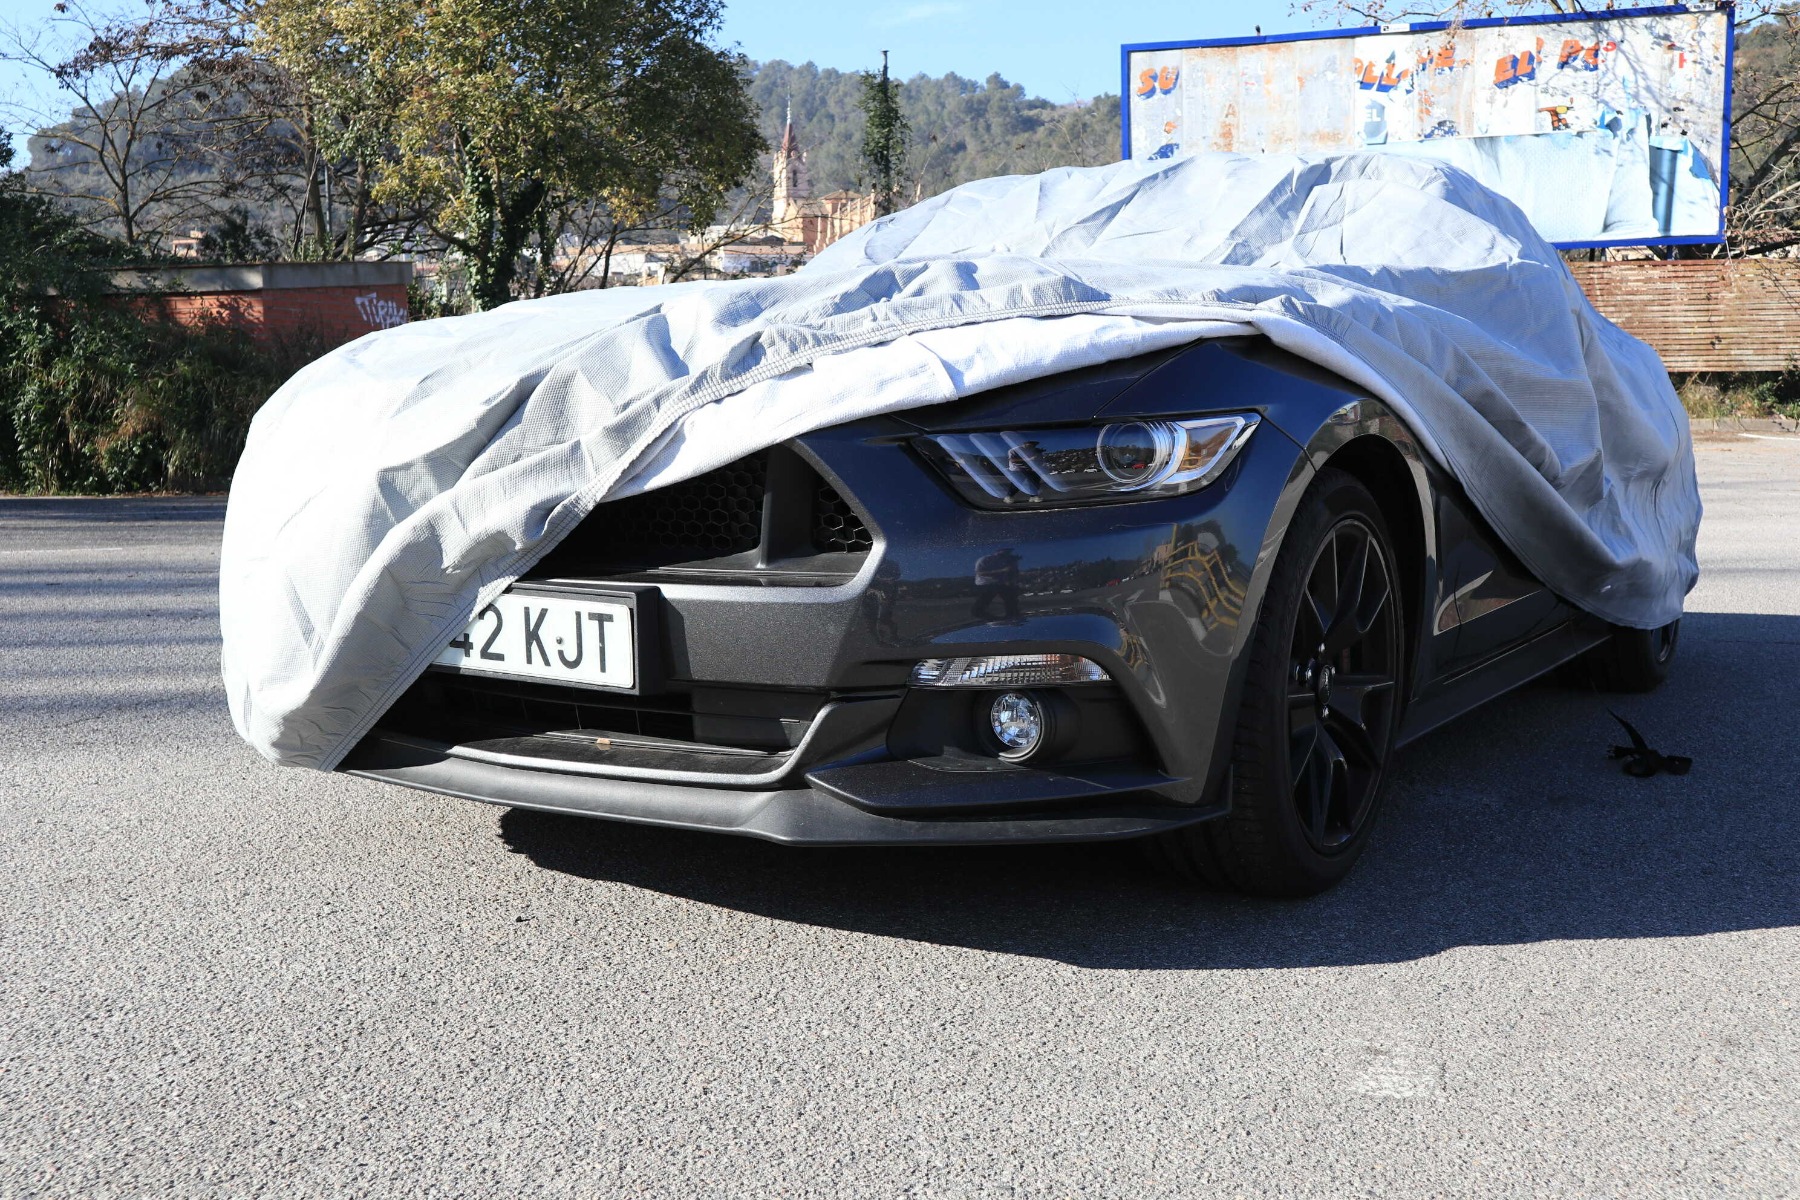 waterproof car cover for Ford